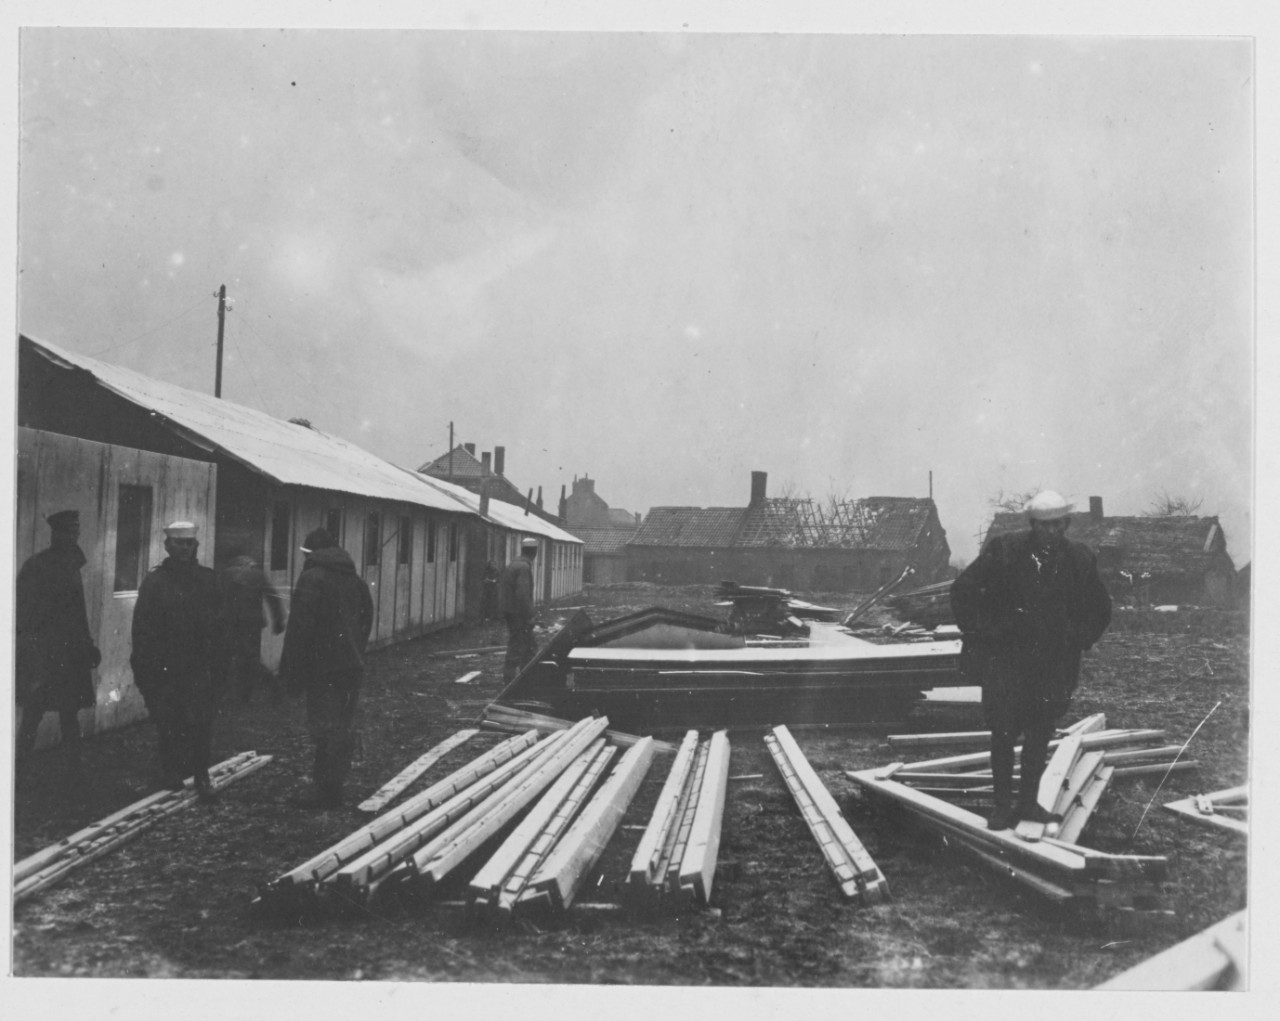 Navy relief work near Lille, France during World War I